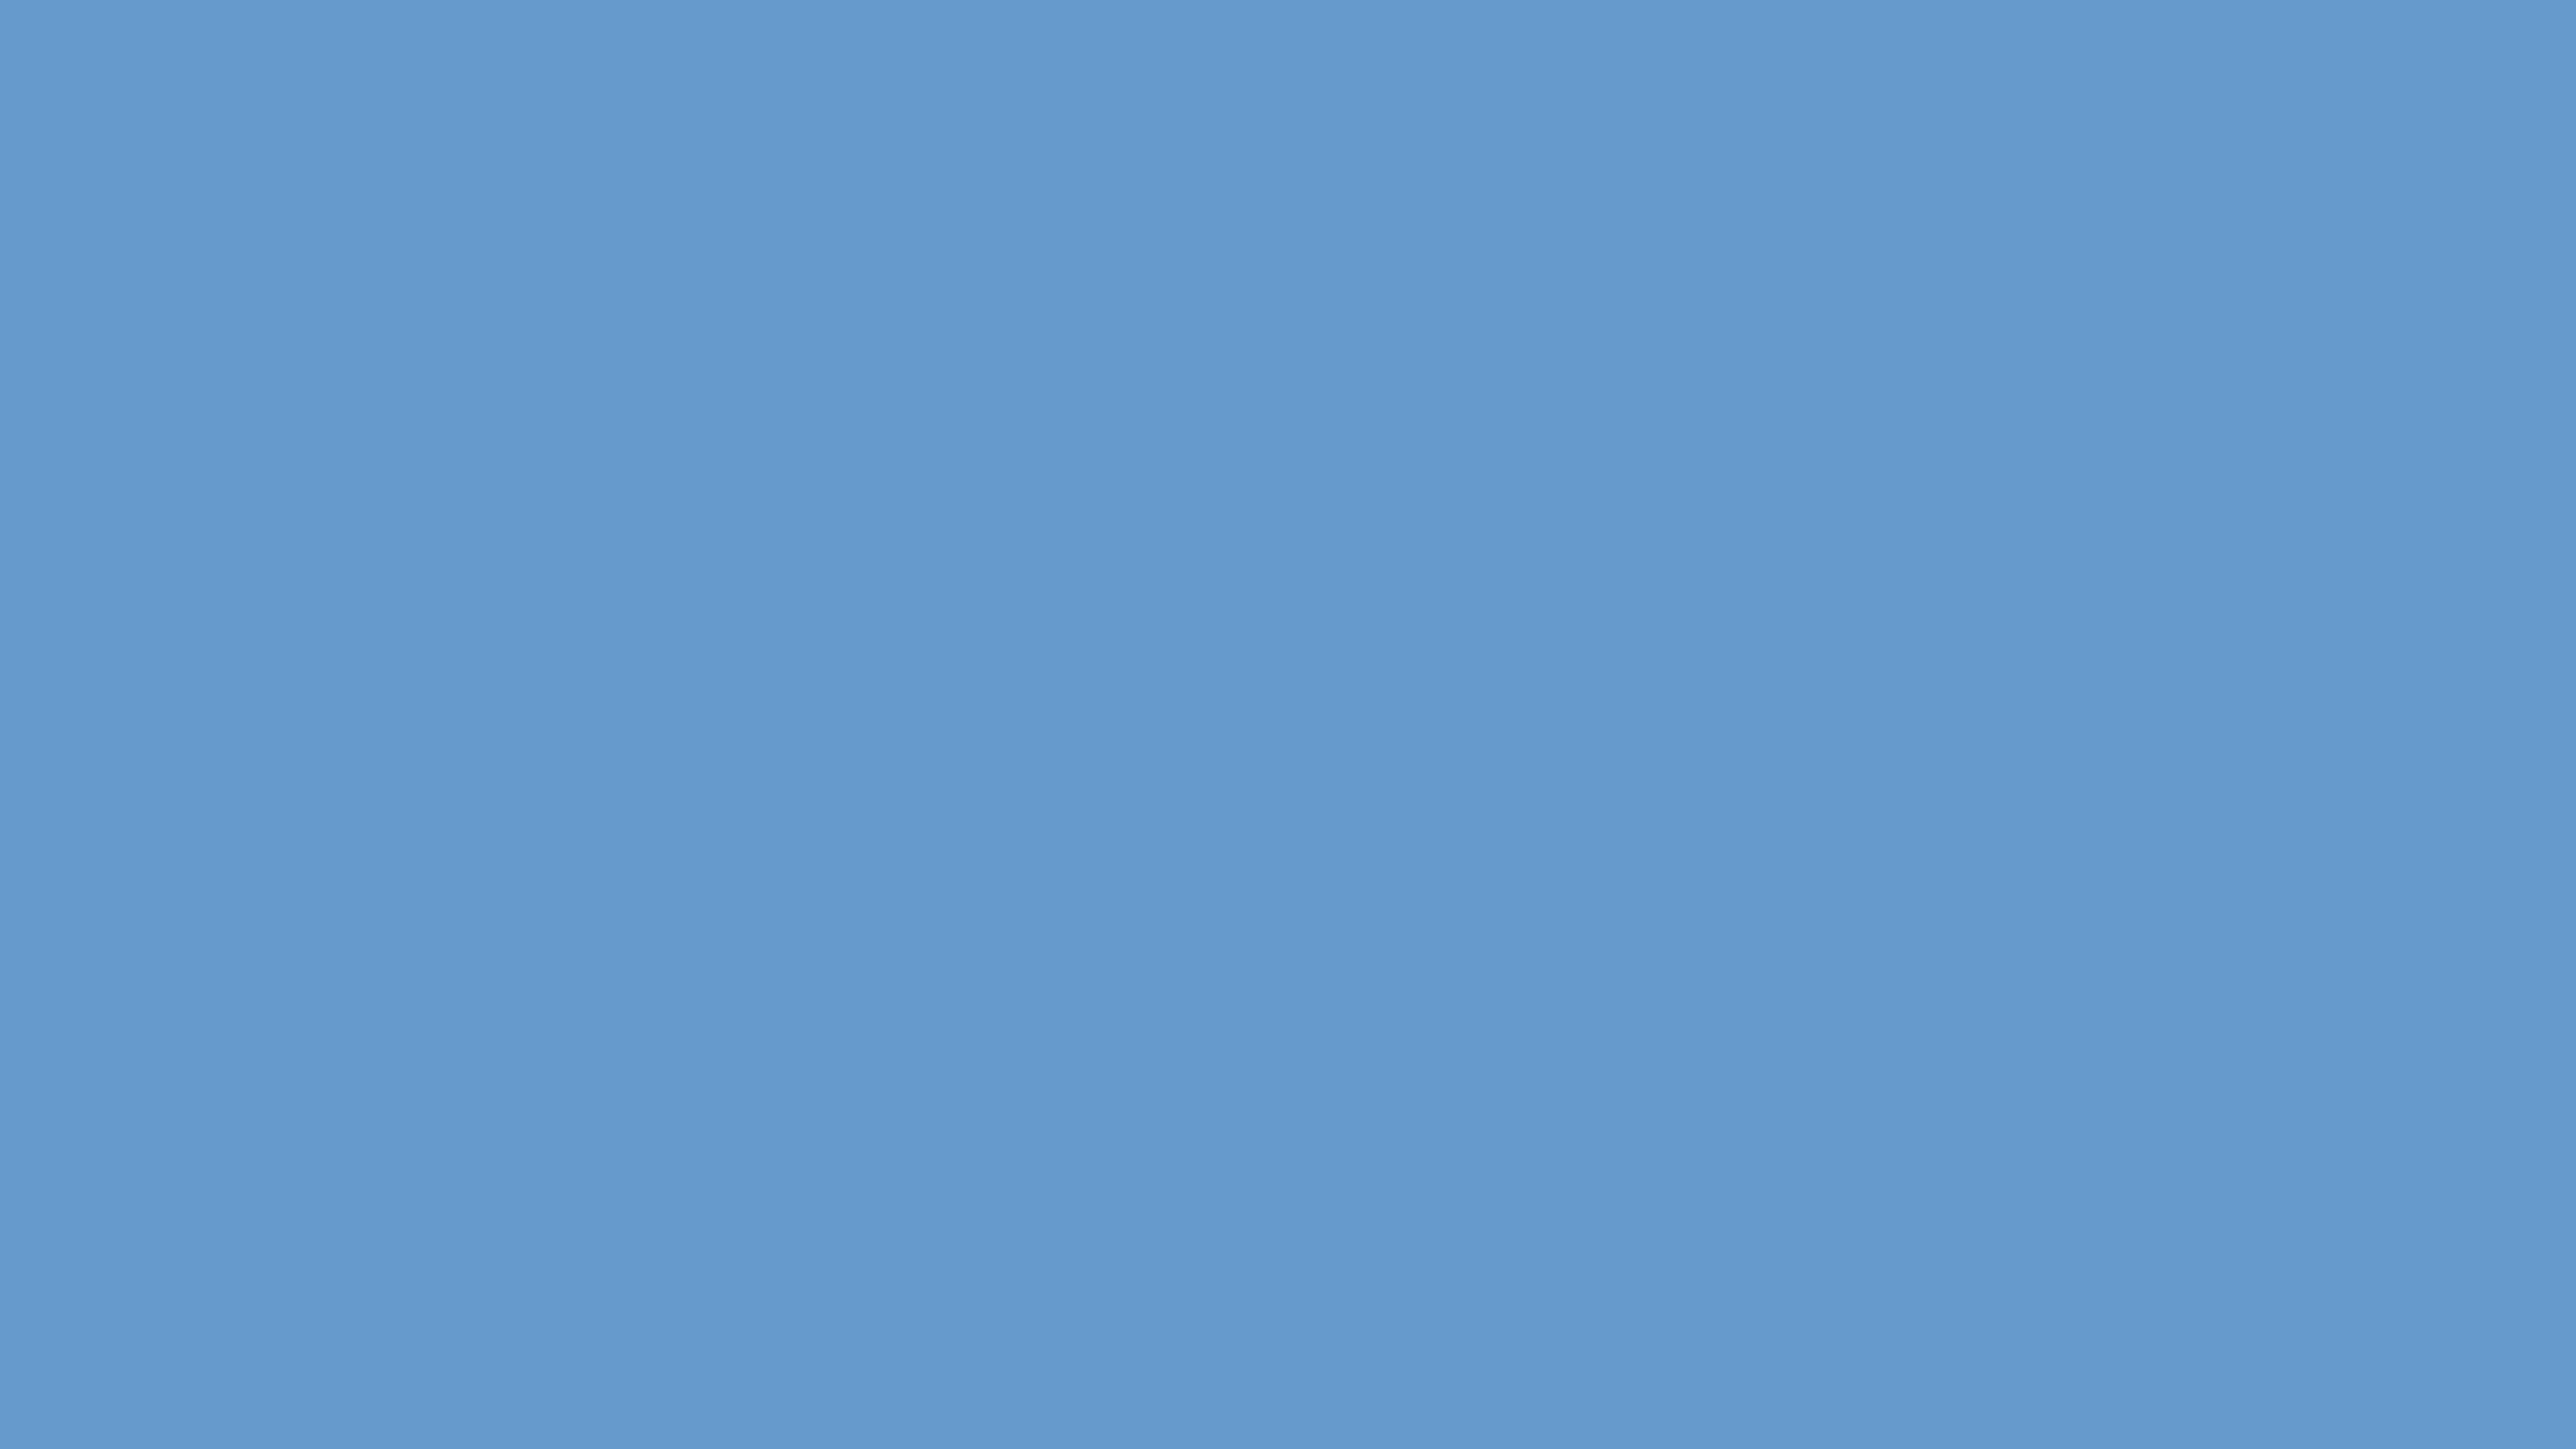 7680x4320 Blue-gray Solid Color Background